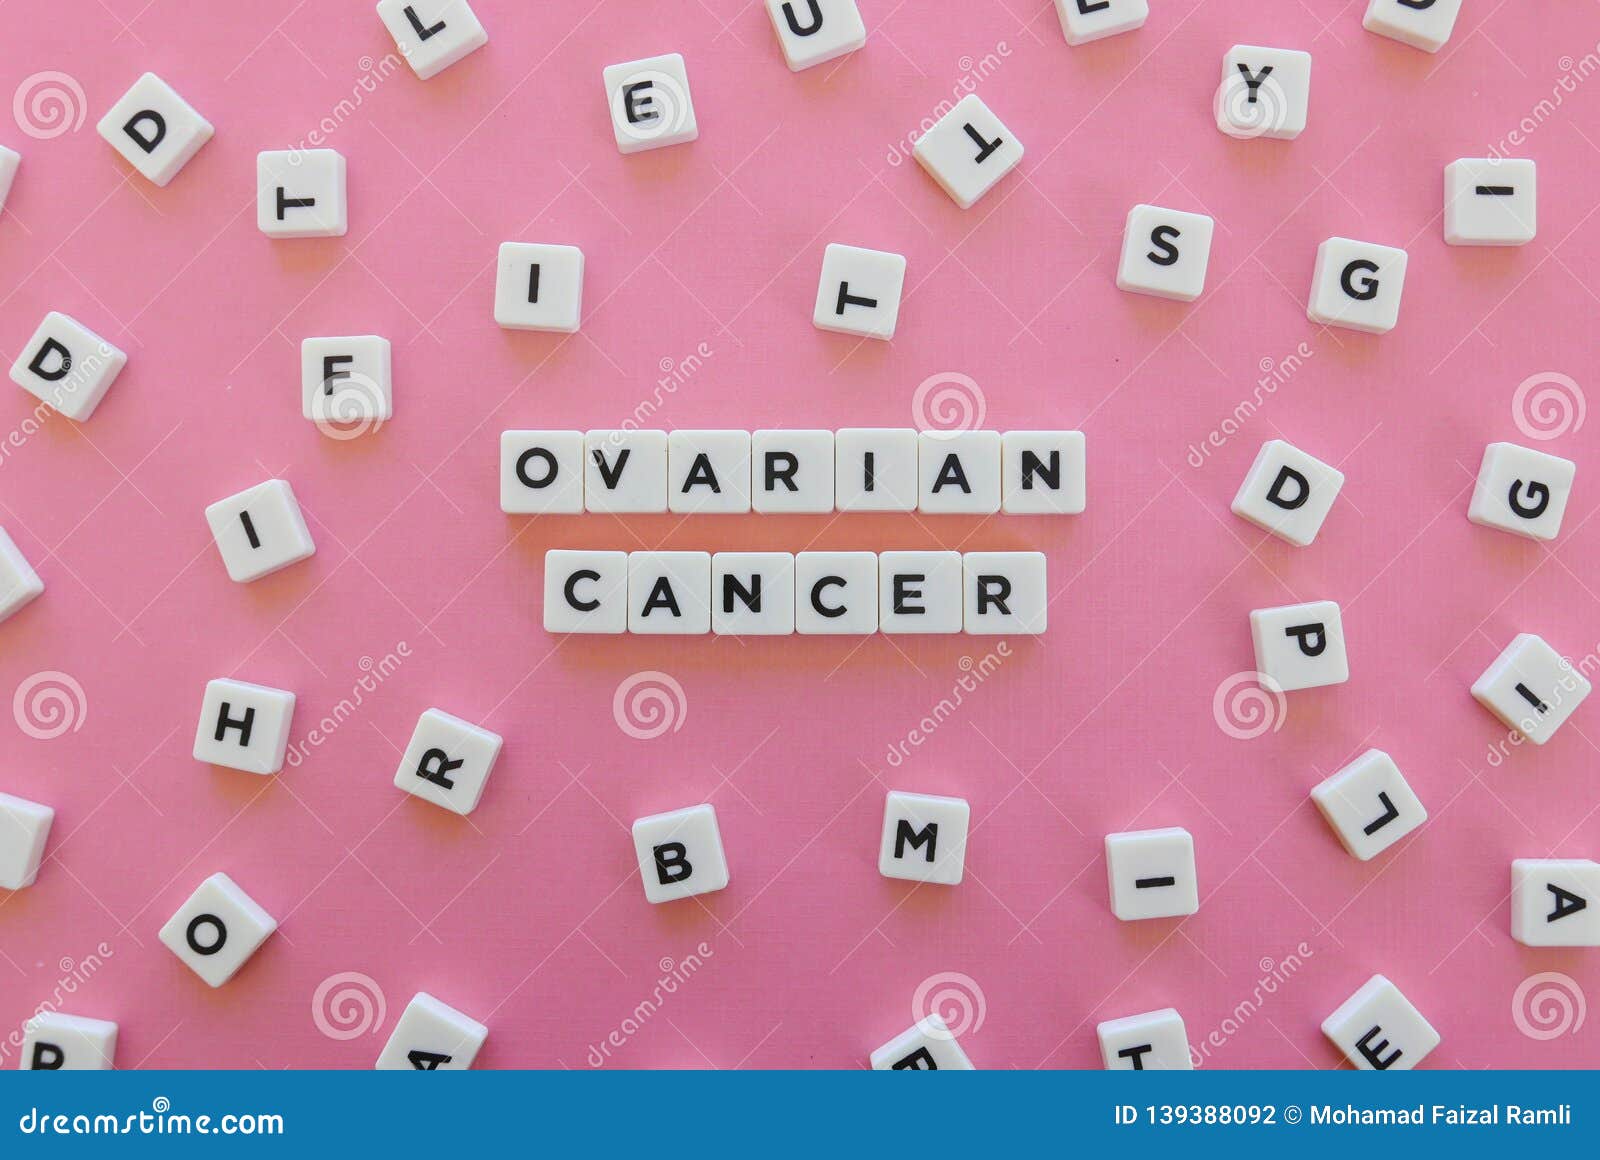 ovarian cancer word made of square letter word on pink background.